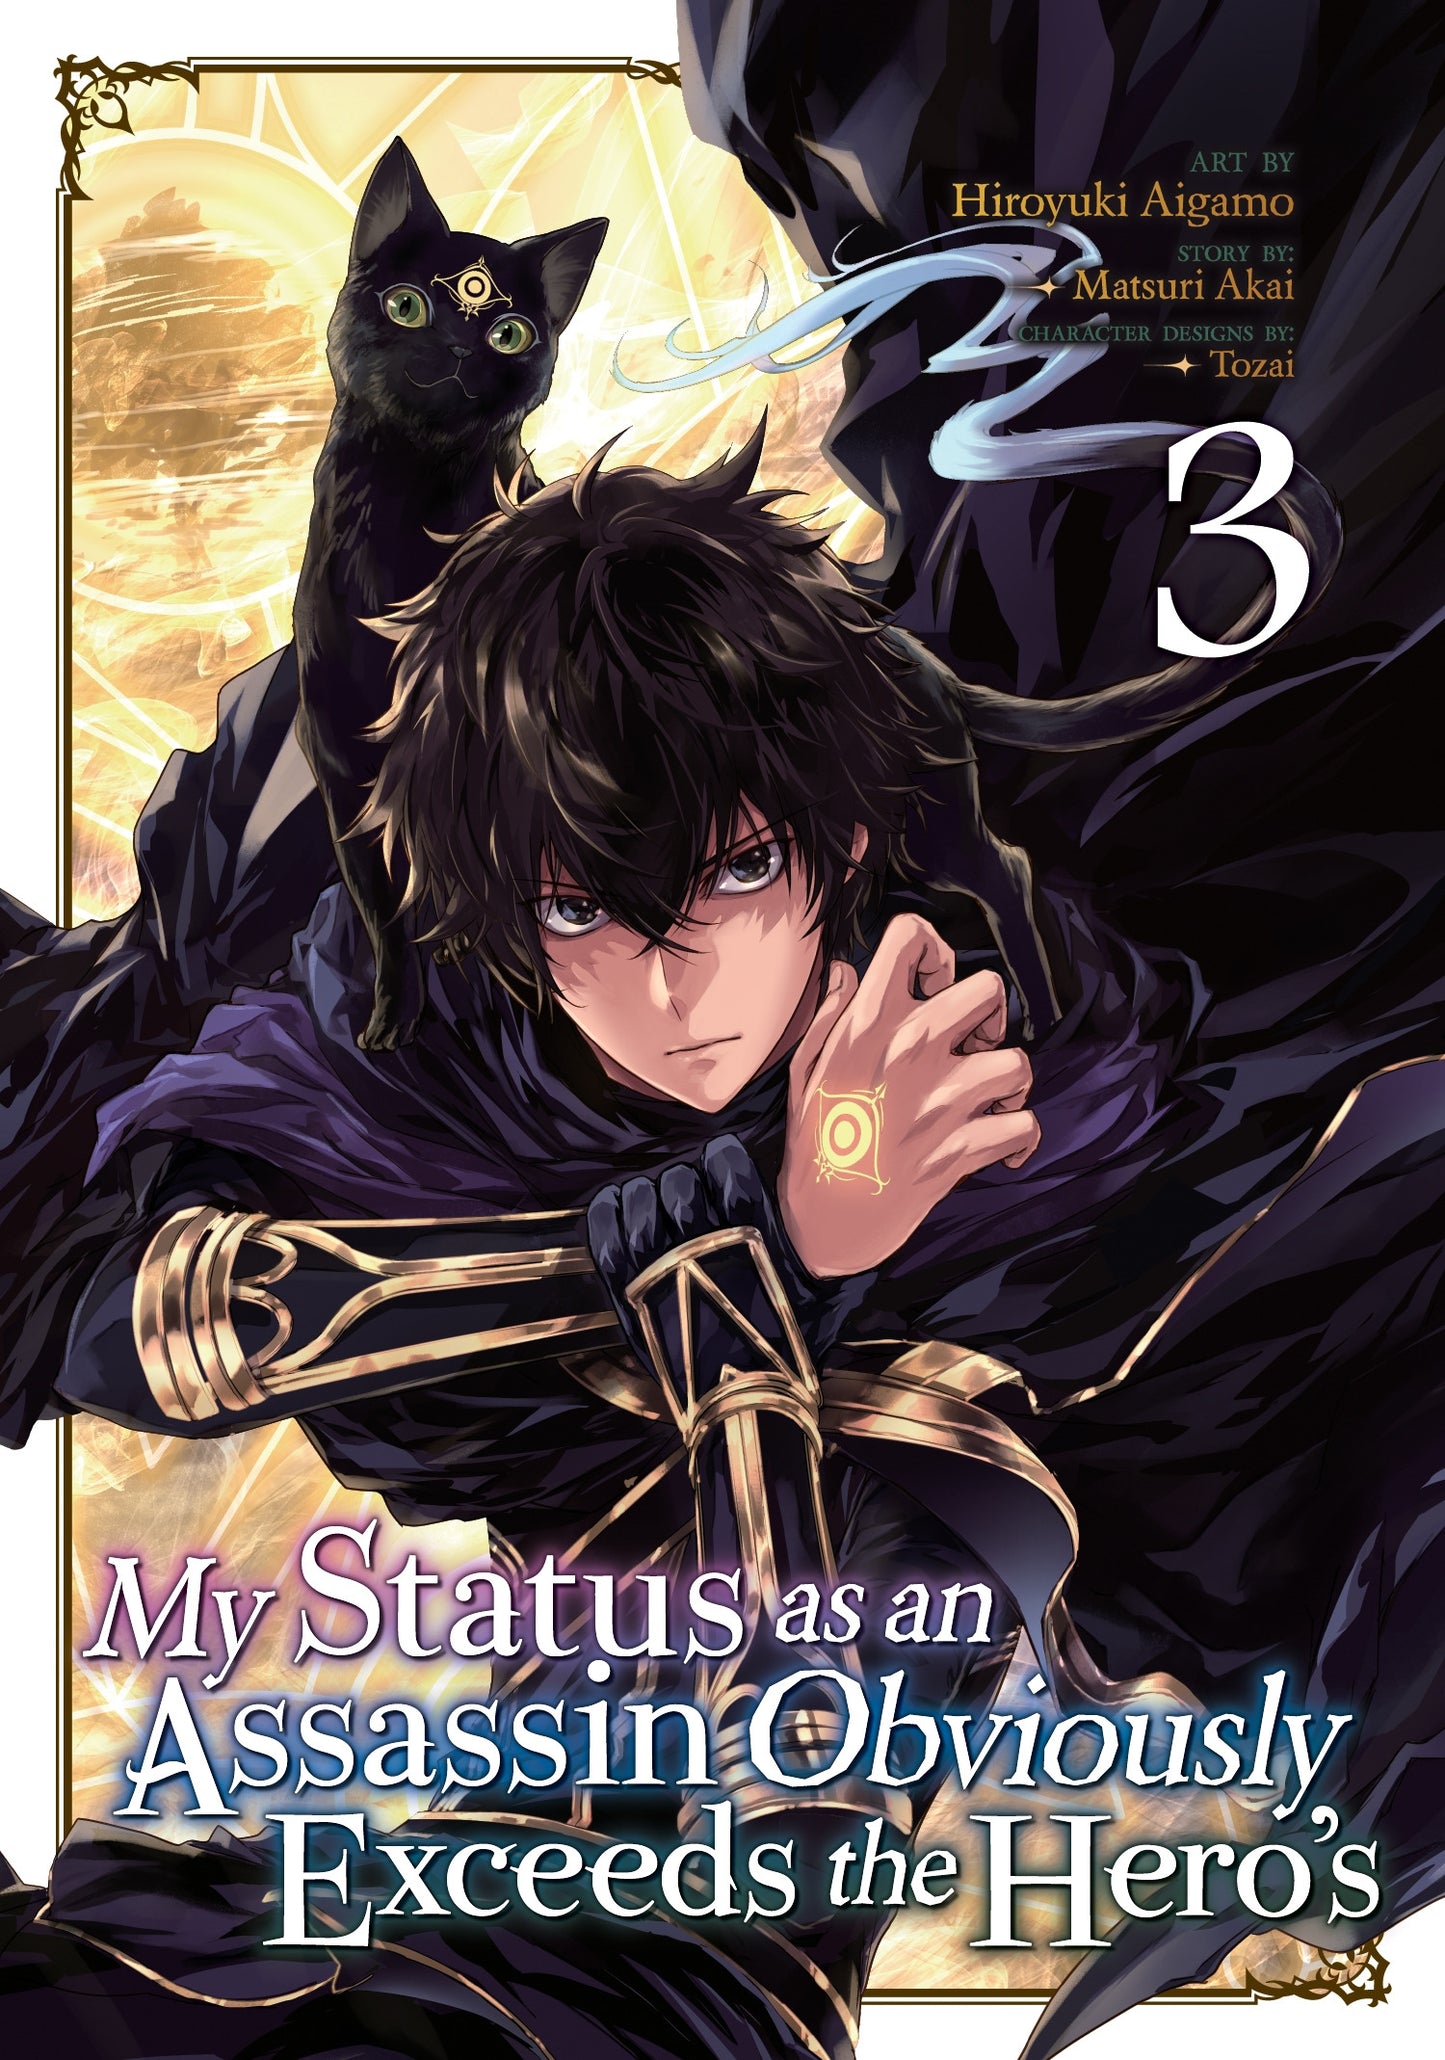 My Status as an Assassin Obviously Exceeds the Hero's (Manga) Vol. 3 - Manga Warehouse